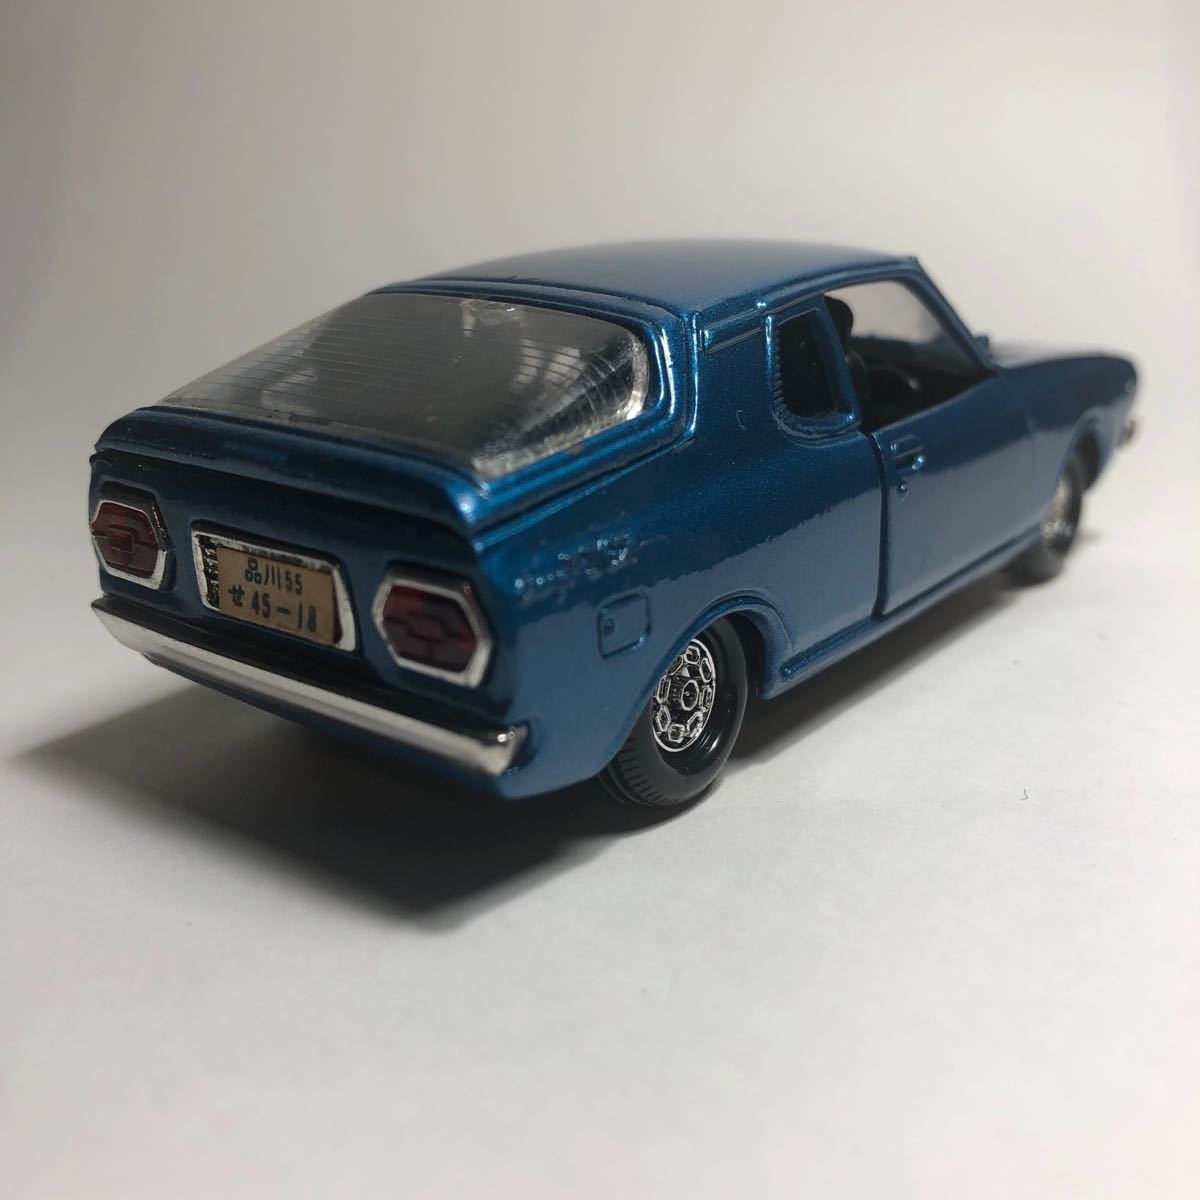  Diapet Nissan Cherry F-Ⅱ 1400 coupe blue 1/40 G-15 Yonezawa made in Japan ( loose goods )F10 type CHERRY 12 number factory made Showa era 51 year sale that time thing 